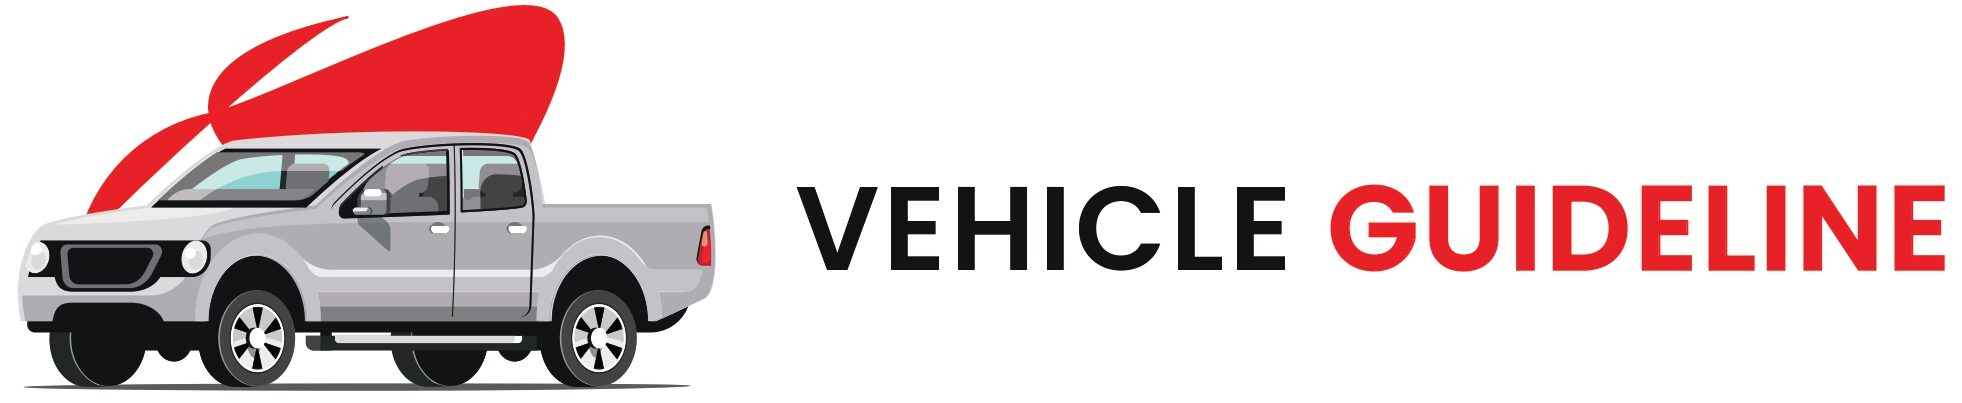 Guideline to vehicle